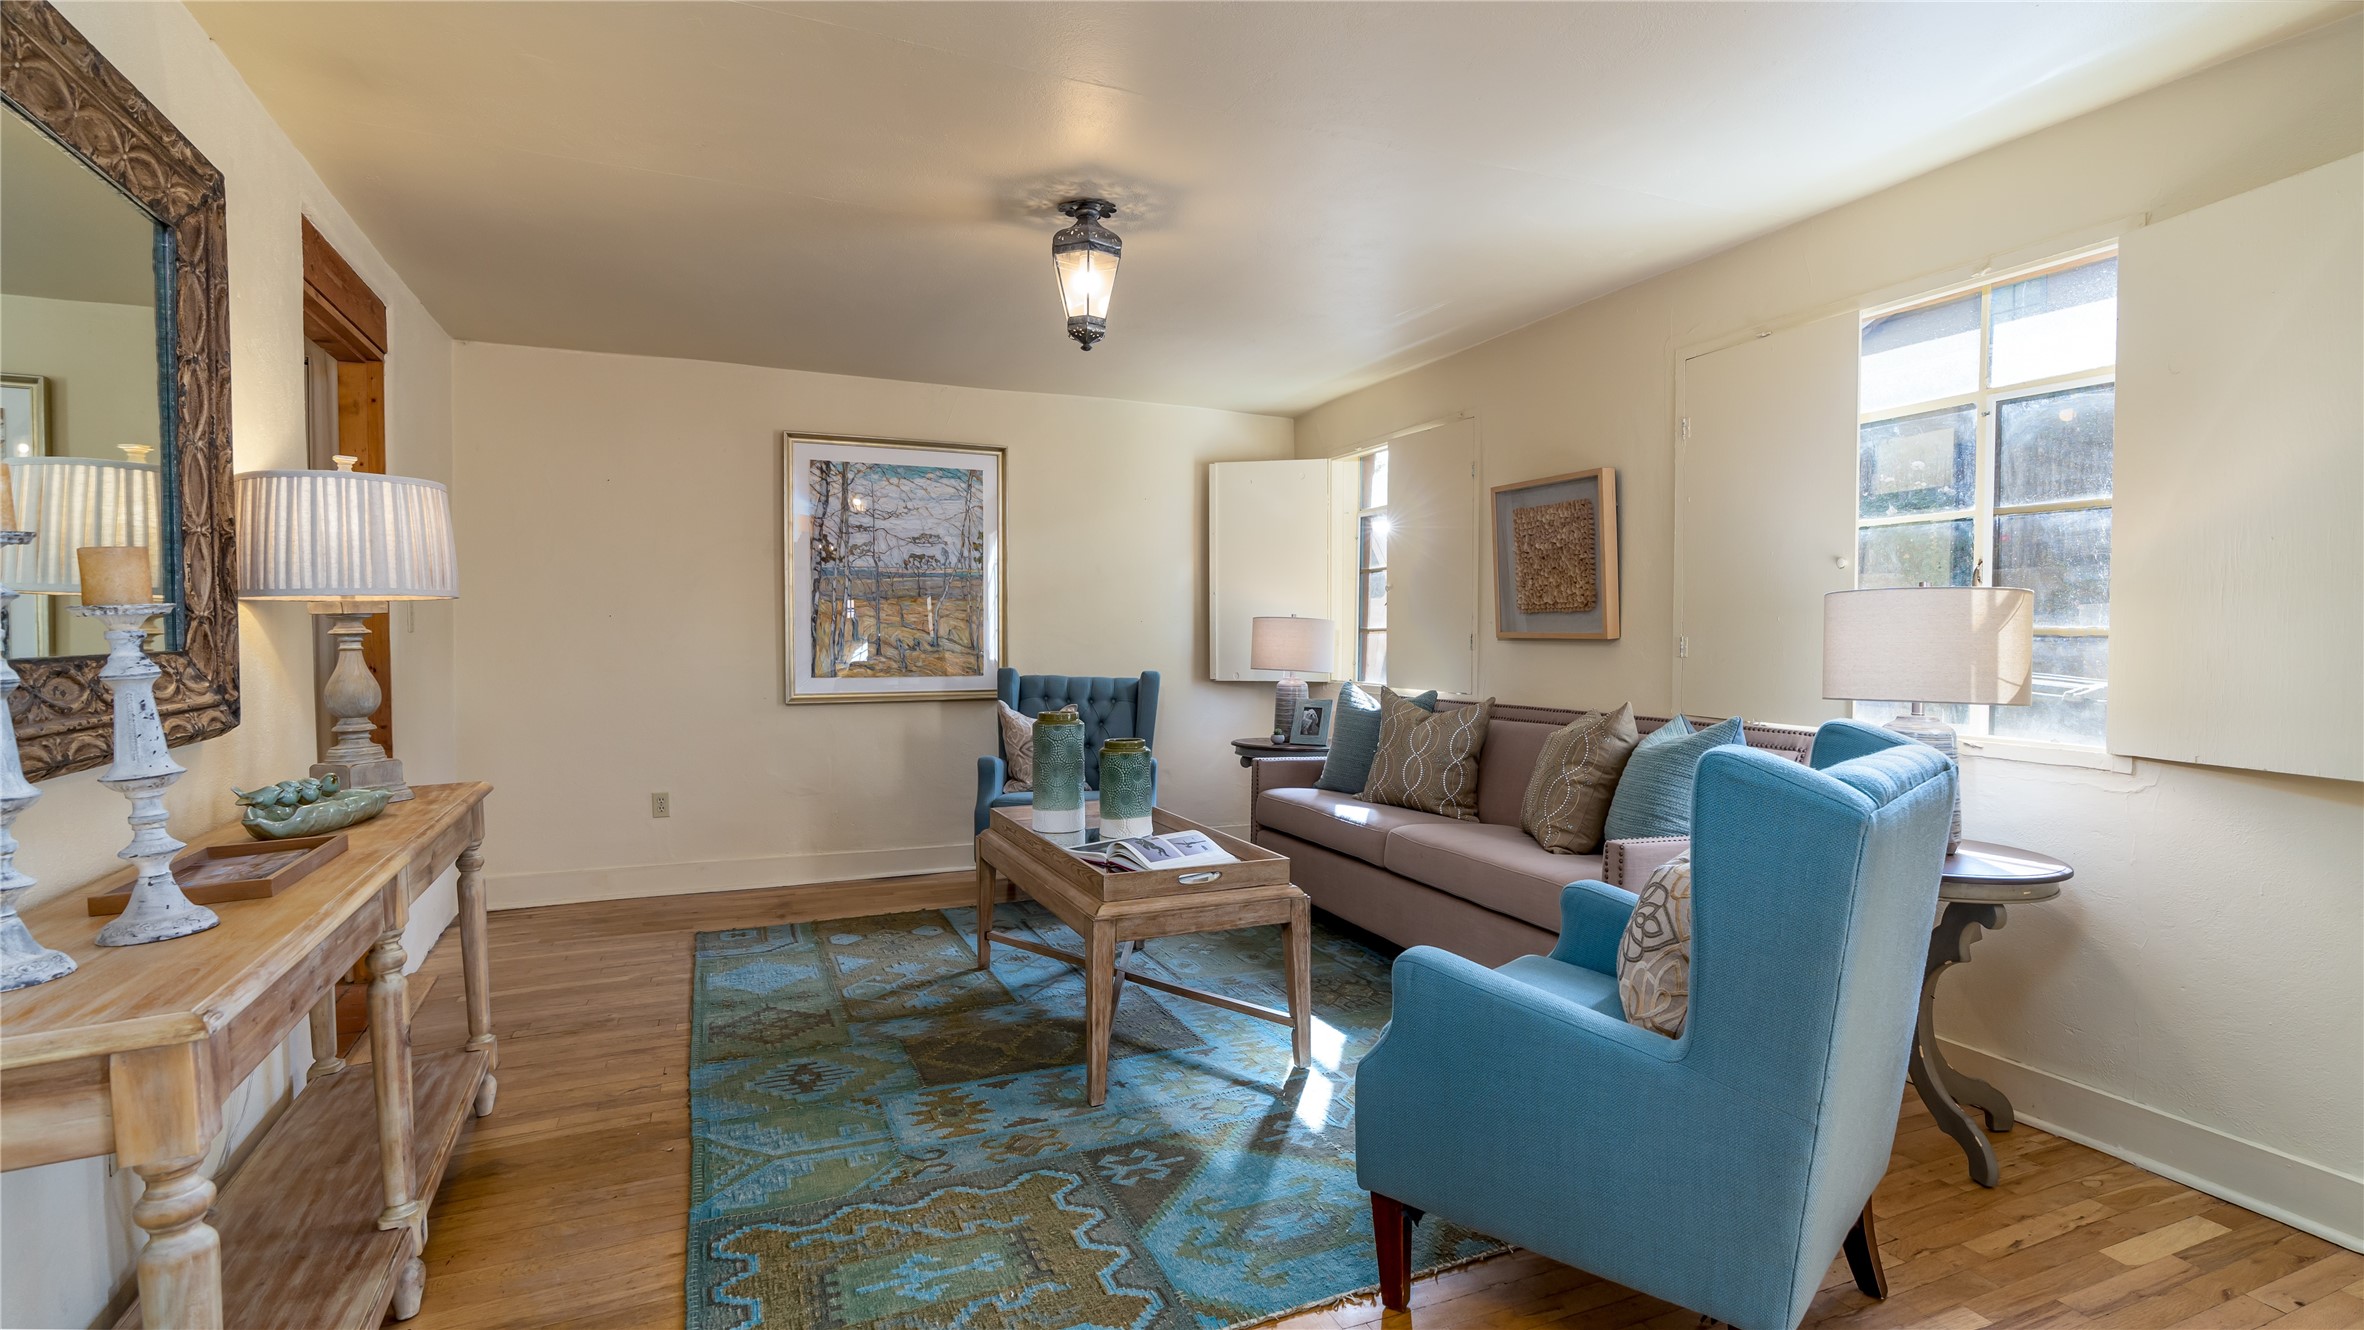 1027 Canyon A, Santa Fe, New Mexico 87501, 2 Bedrooms Bedrooms, ,1 BathroomBathrooms,Residential,For Sale,1027 Canyon A,202232826